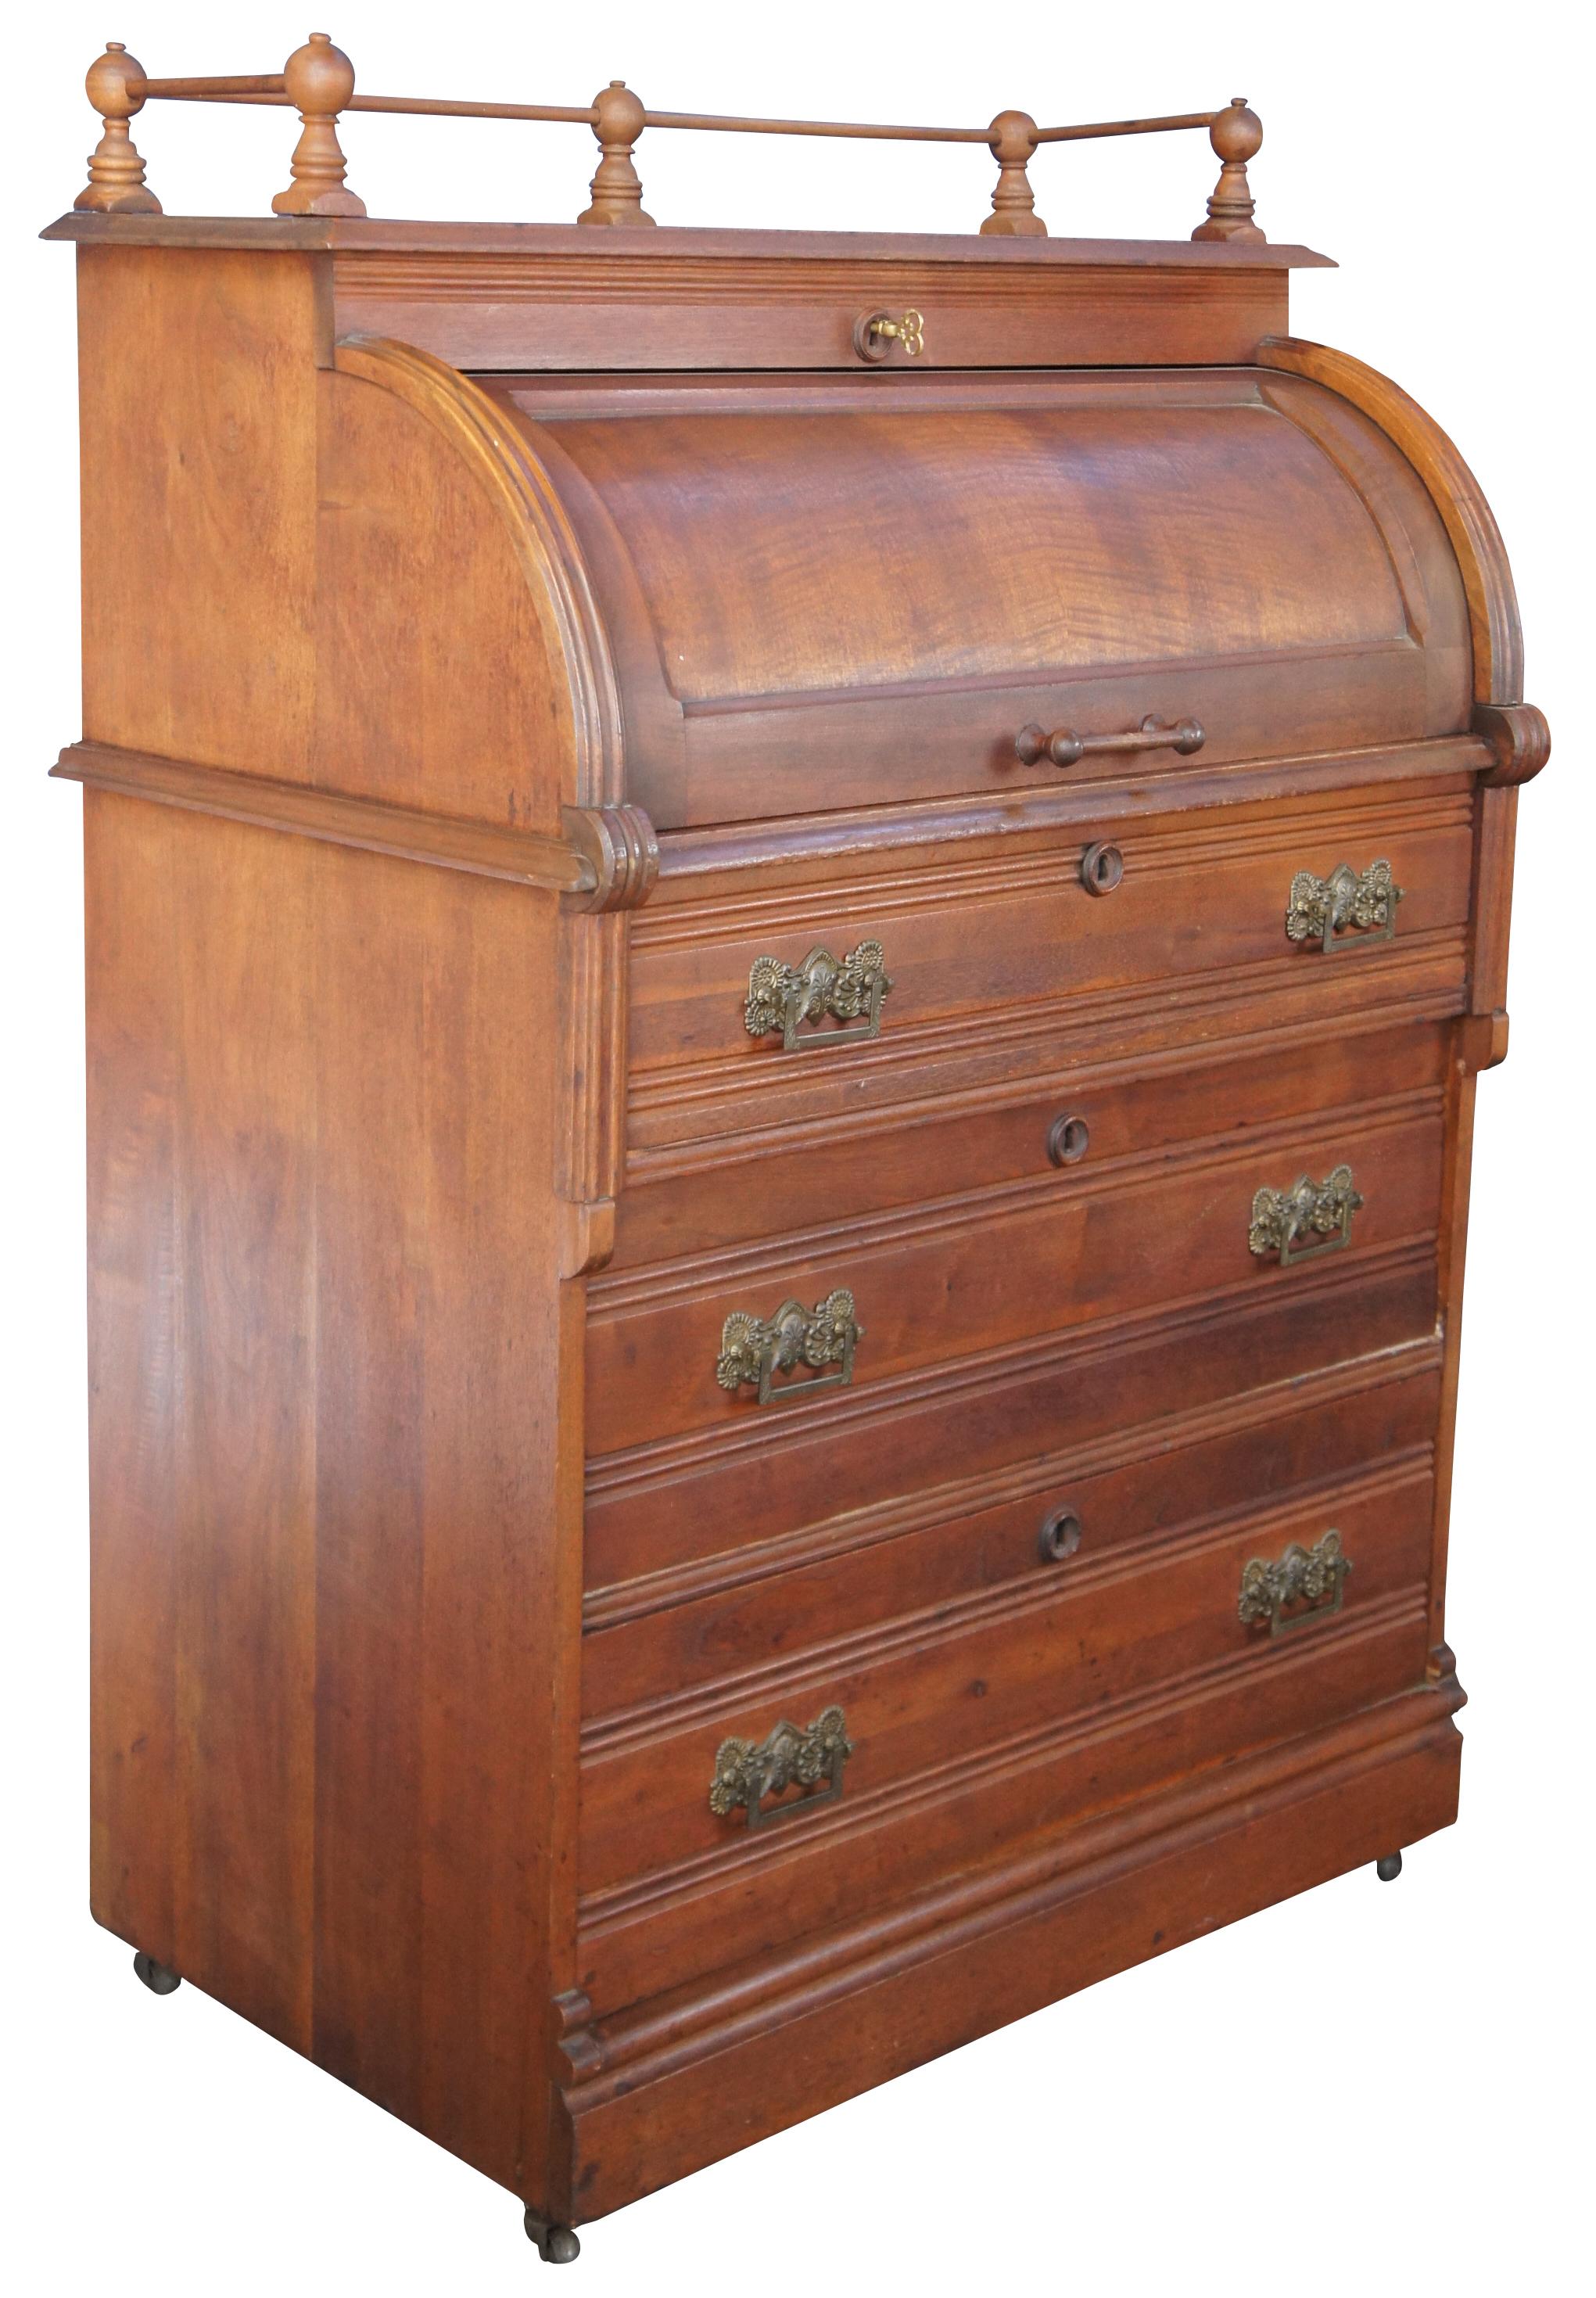 Antique 19th century Aesthetic period cylinder roll top secretary writing desk. Made of maplewood featuring lower chest with three knapp joint drawers, a roll top that opens to leather pullout writing surface with multiple drawers and cubbies, upper